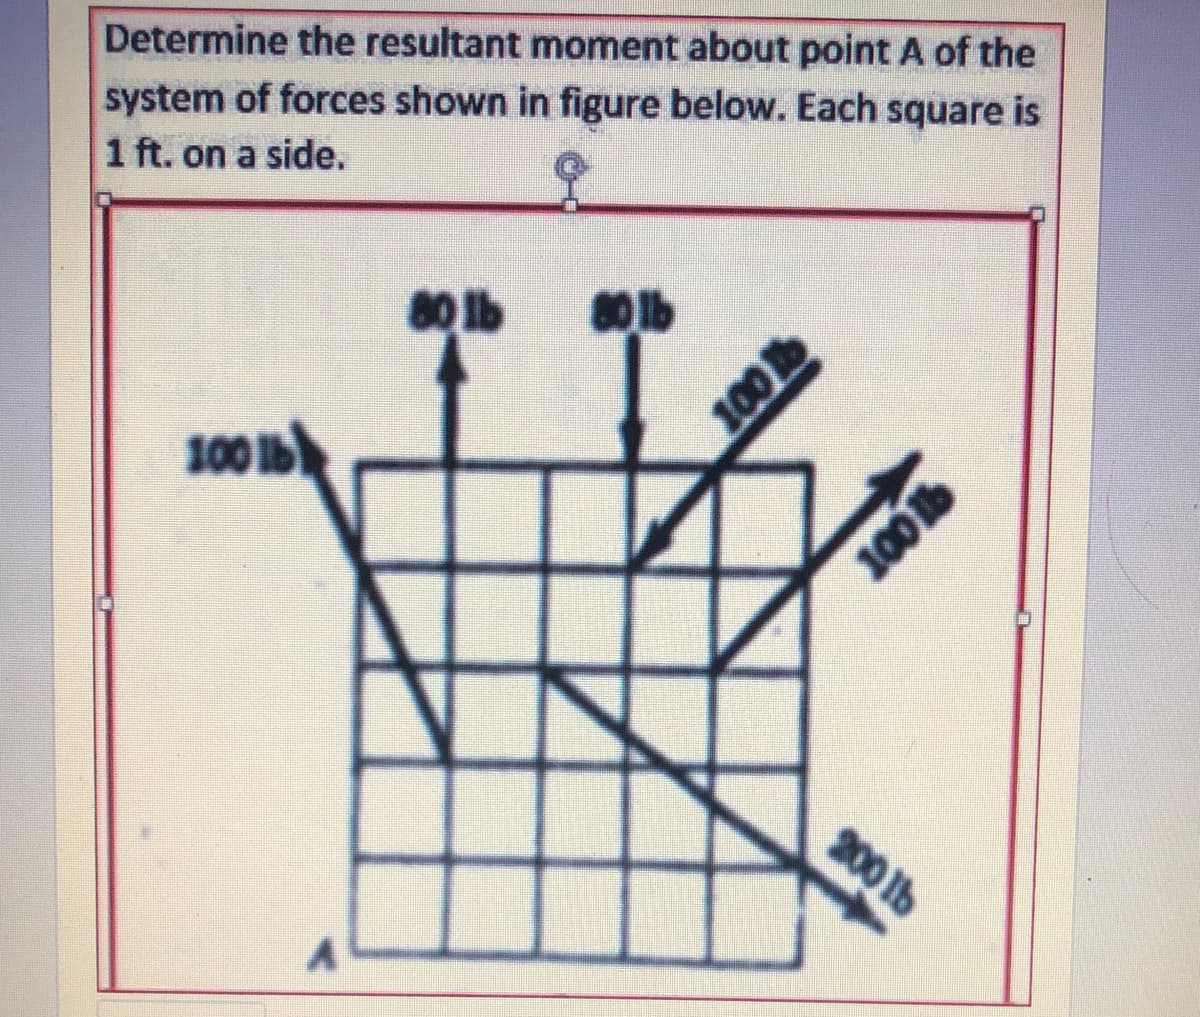 Determine the resultant moment about point A of the
system of forces shown in figure below. Each square is
1 ft. on a side.
80 Ib
80 Ib
100 I)
200 1b
100
100 b
